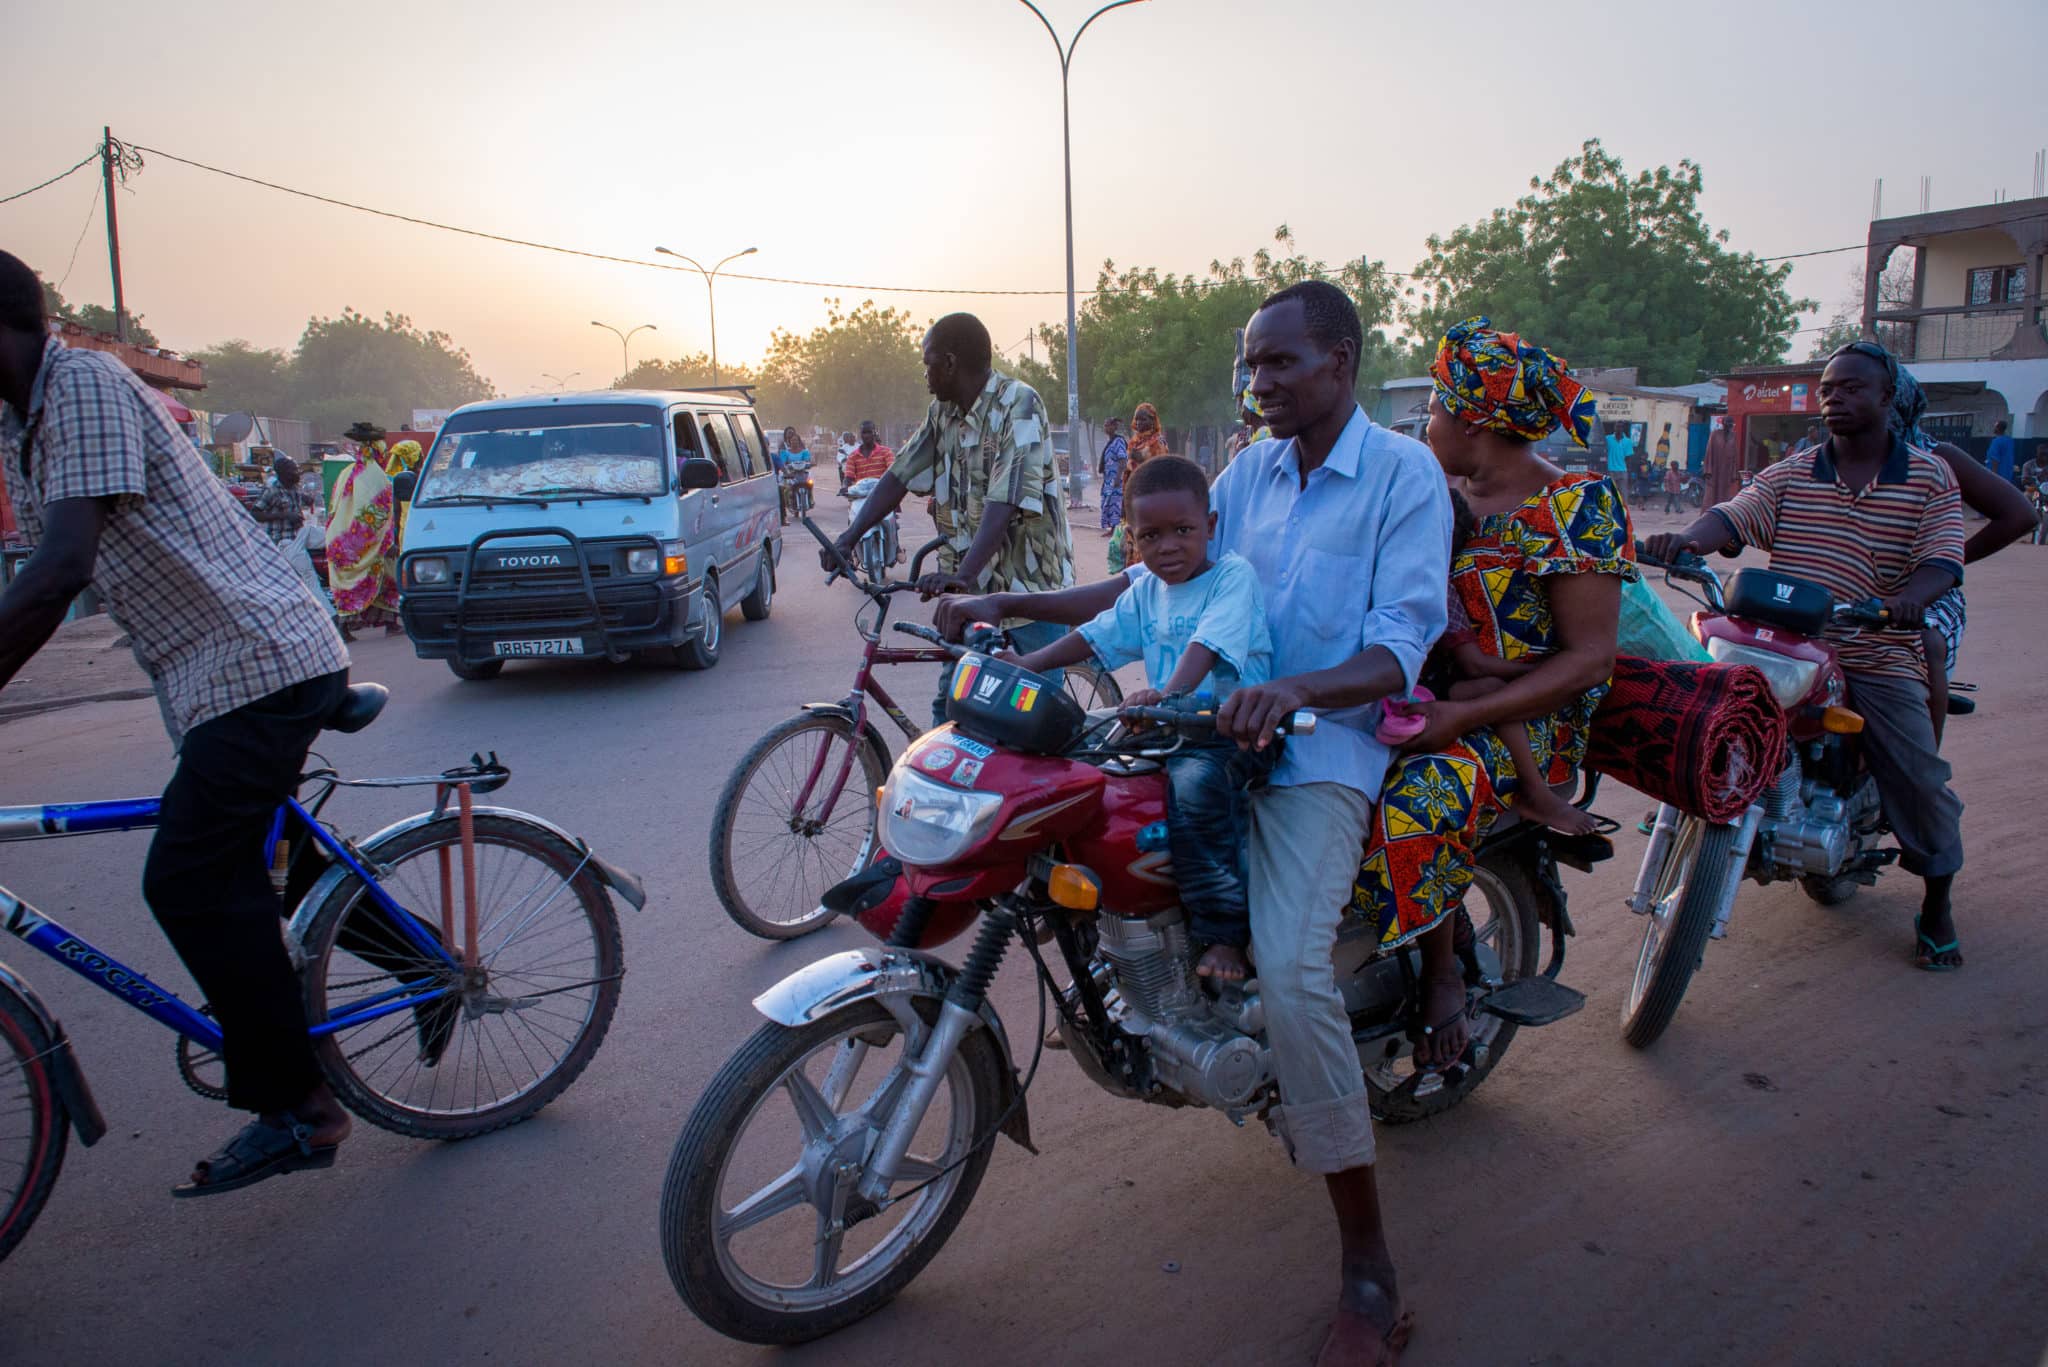 5 Key Transport Challenges Facing Developing Countries and What to Do About Them